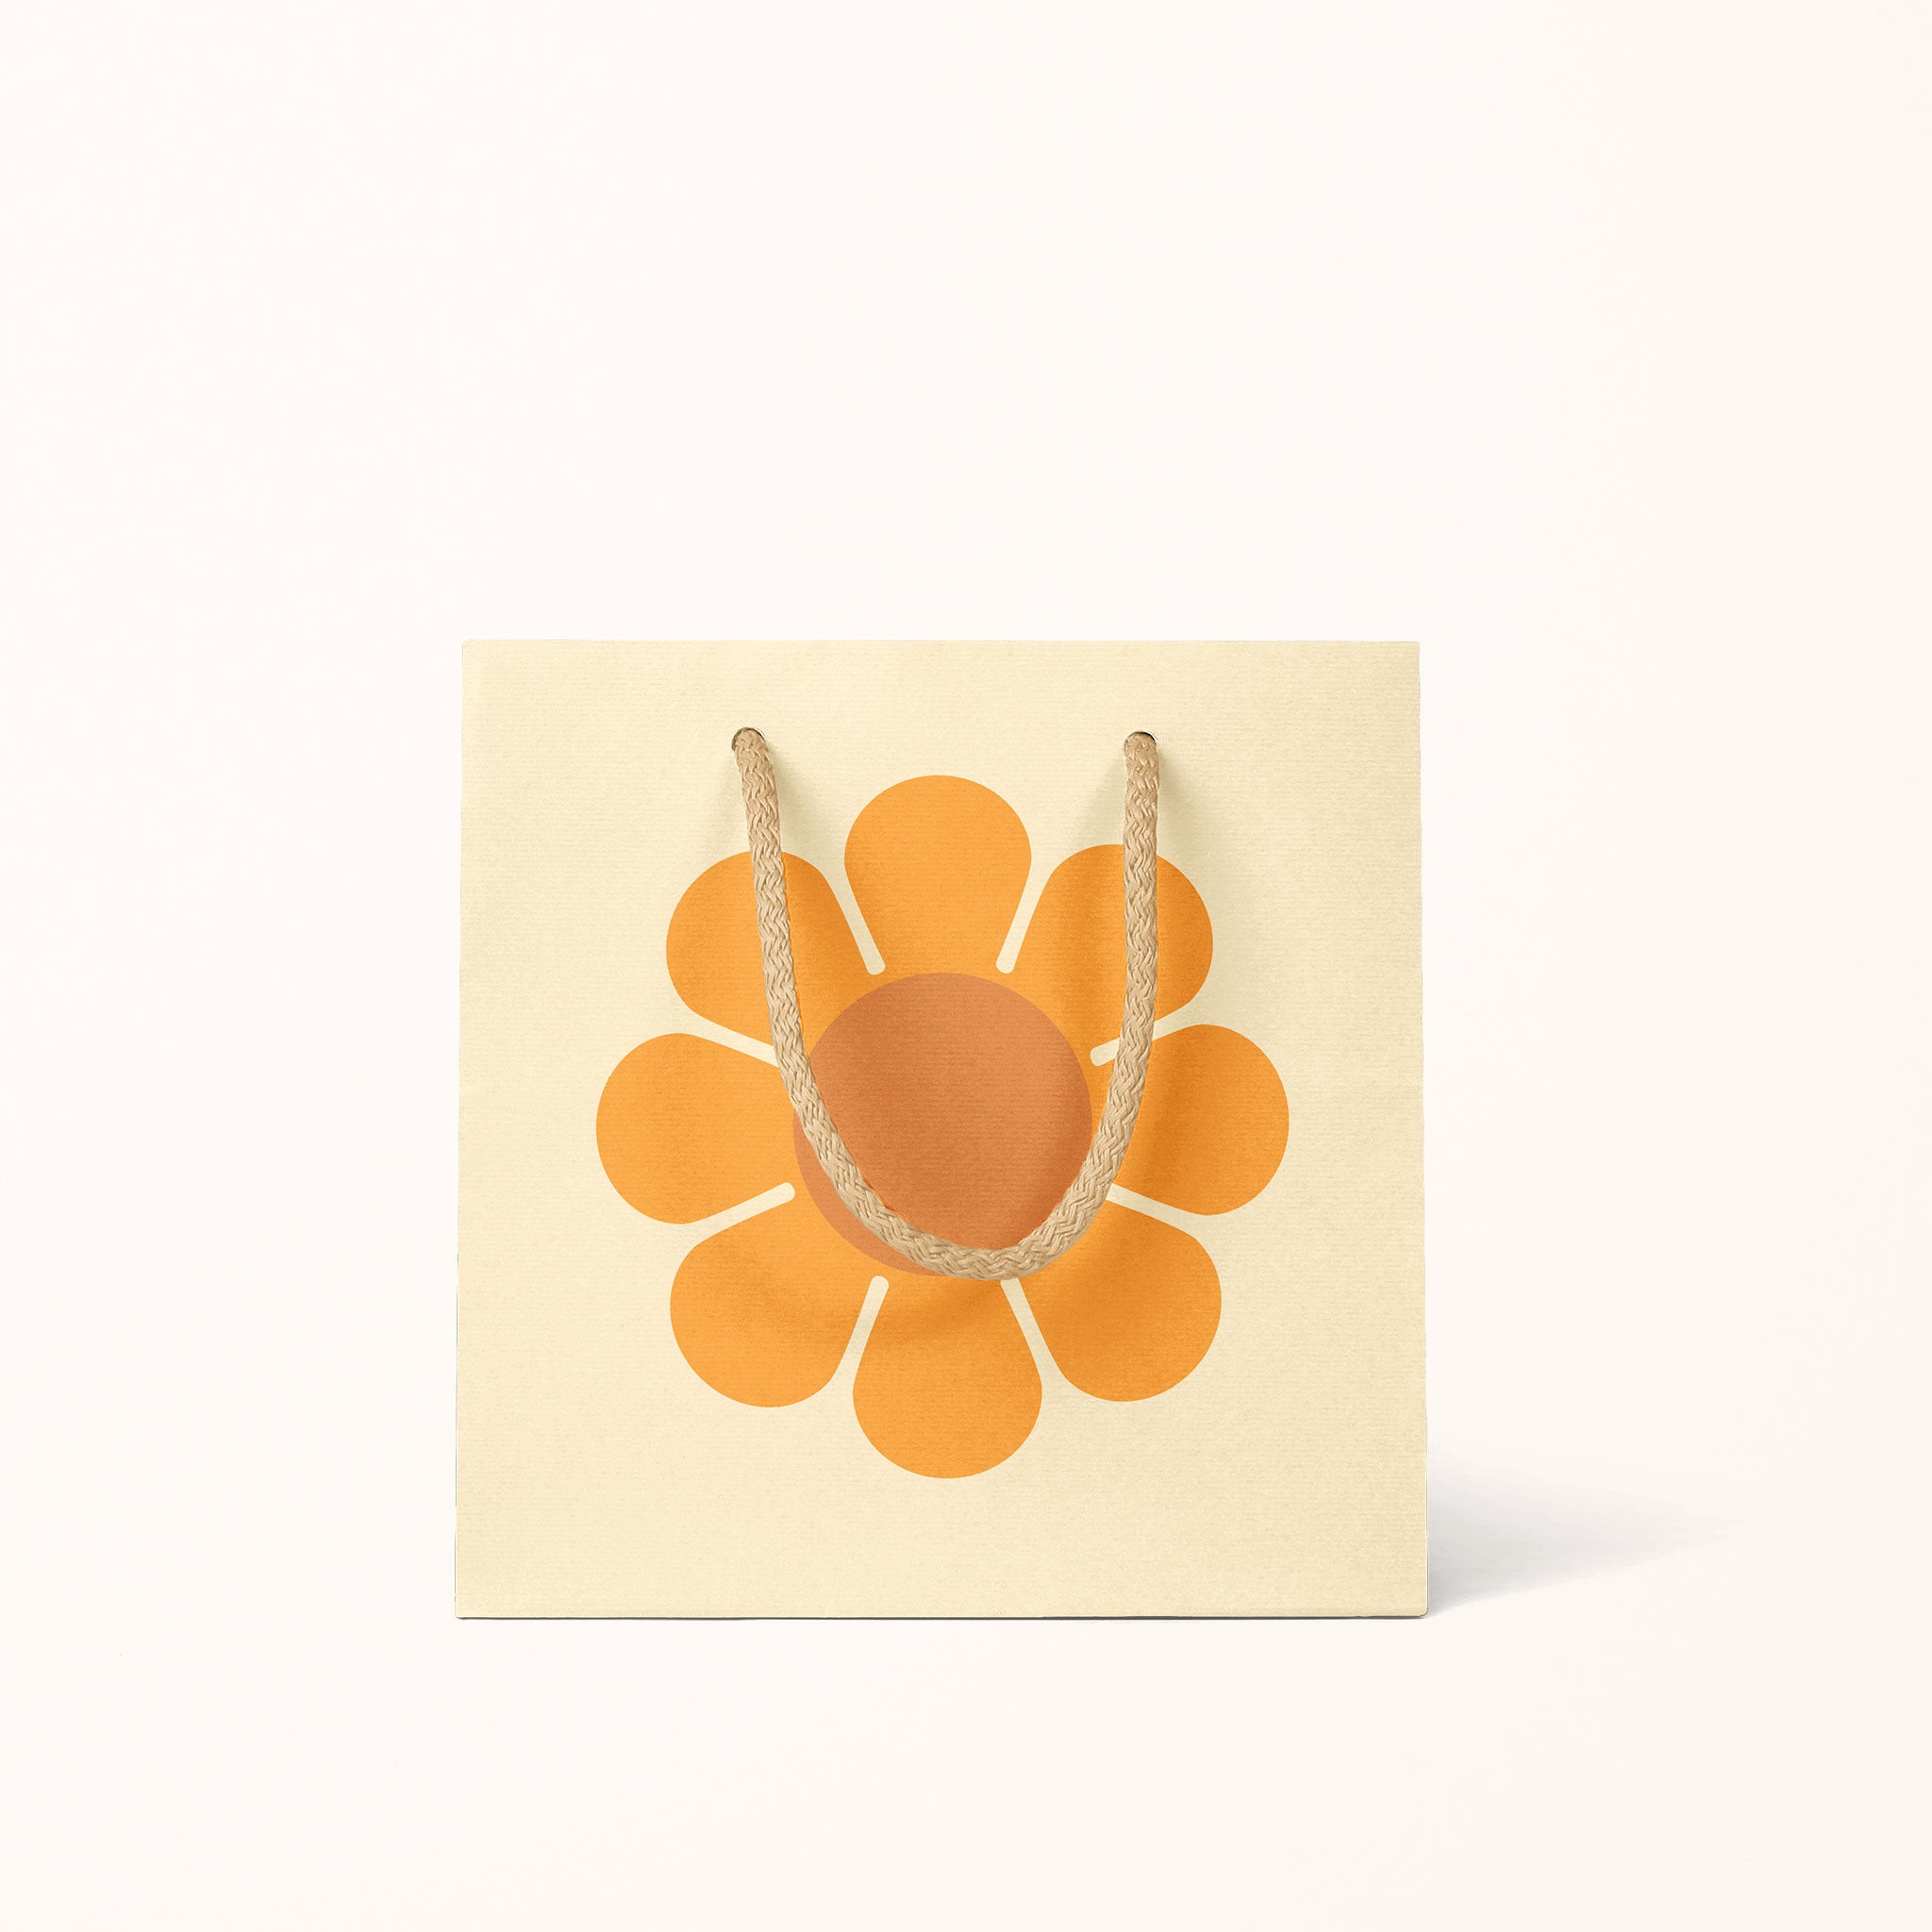 A light yellow gift bag with an orange daisy in the center along with light tan cotton strings.